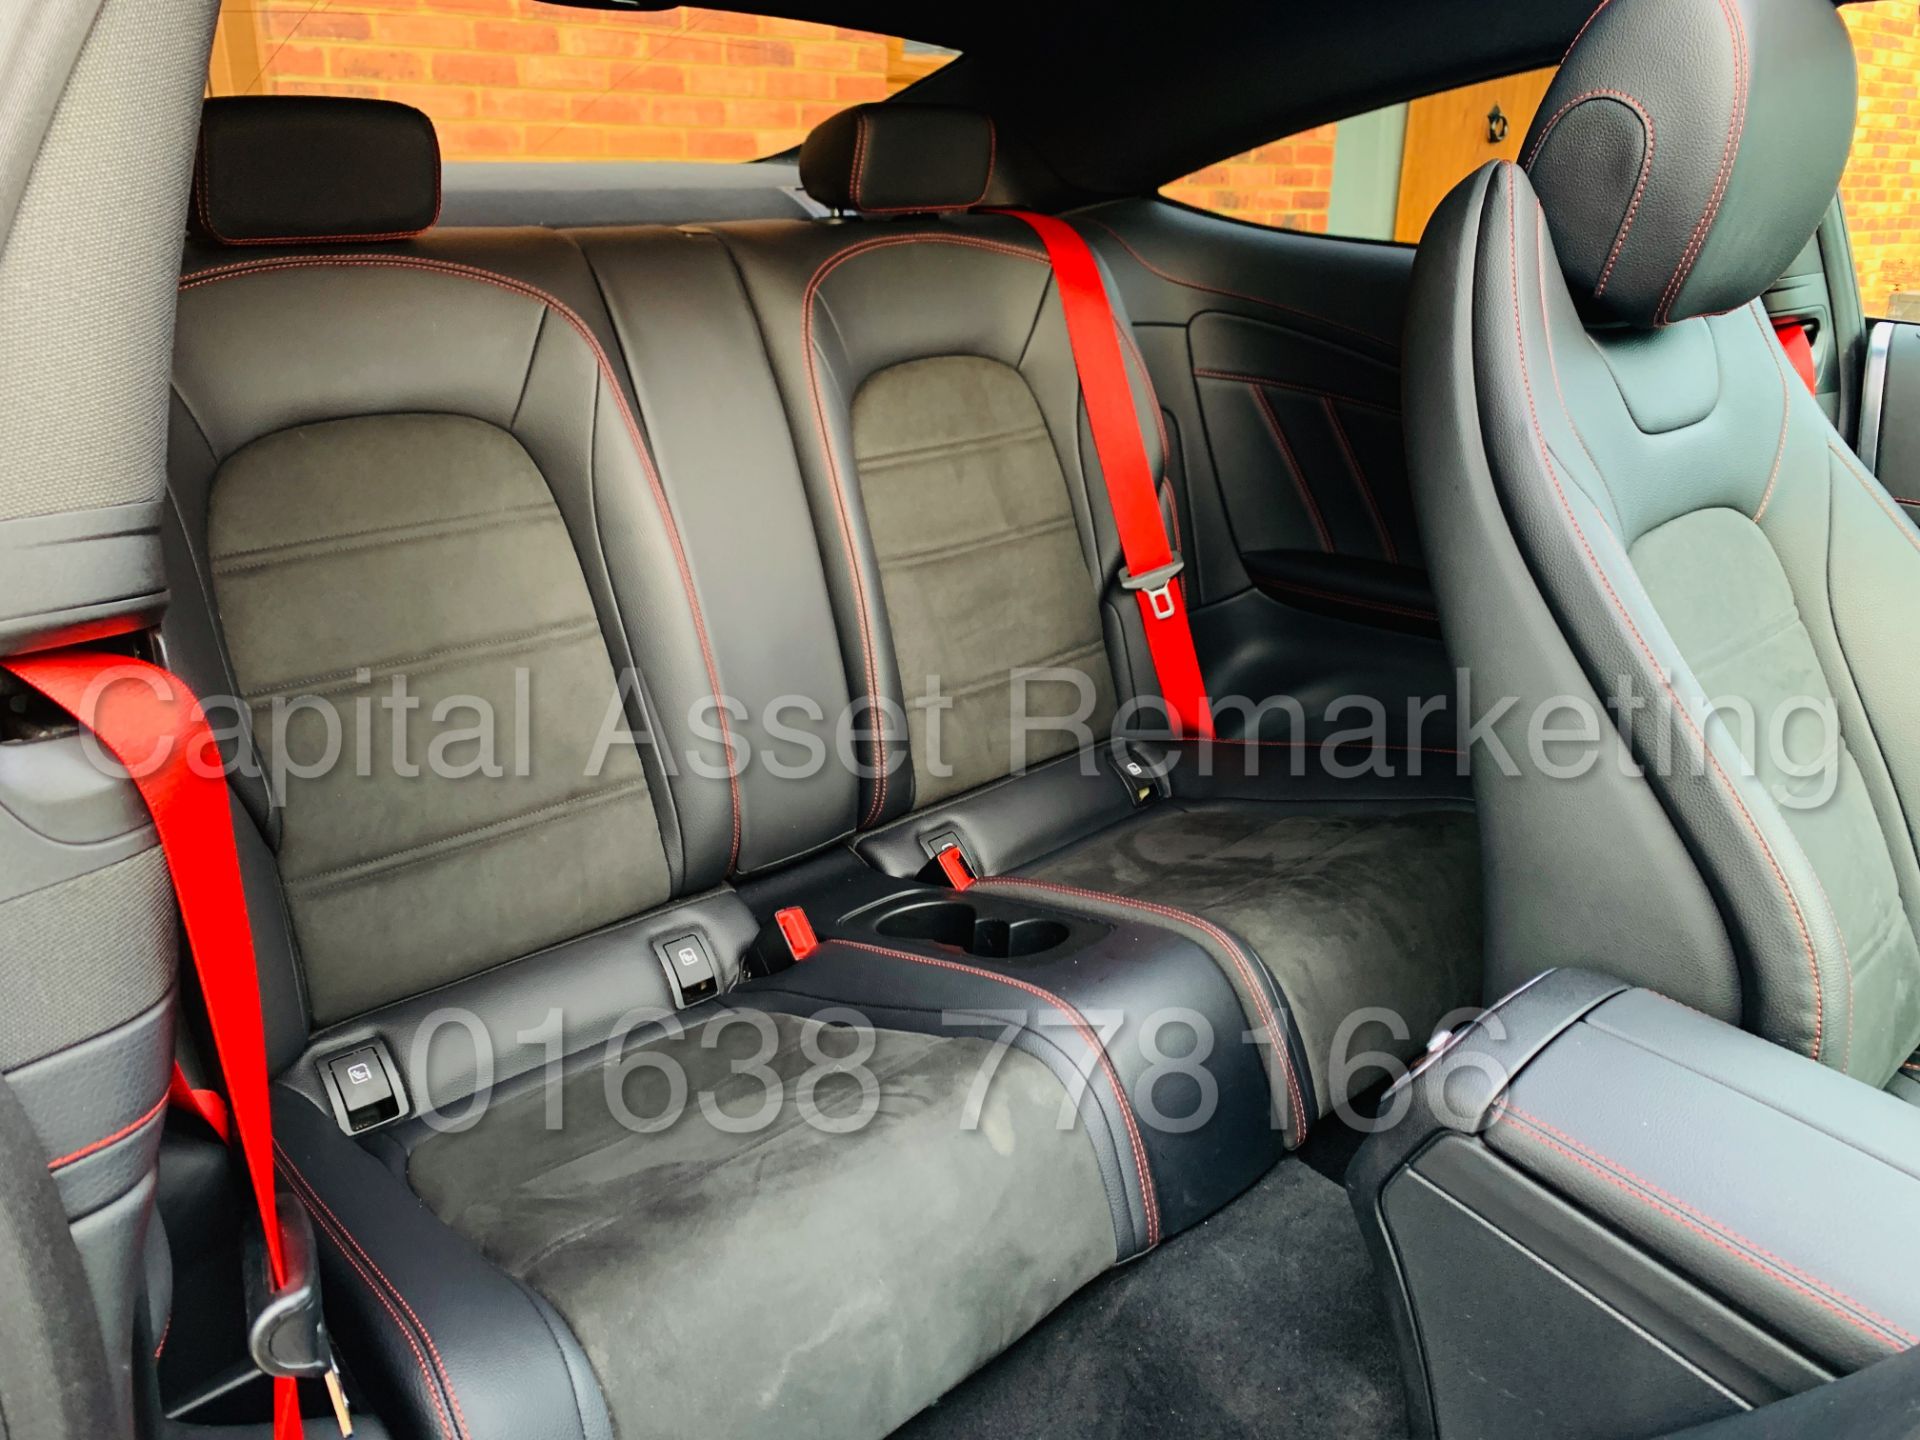 MERCEDES-BENZ C43 AMG *PREMIUM 4 MATIC* COUPE (2017) '9-G AUTO - LEATHER - SAT NAV' **FULLY LOADED** - Image 28 of 46